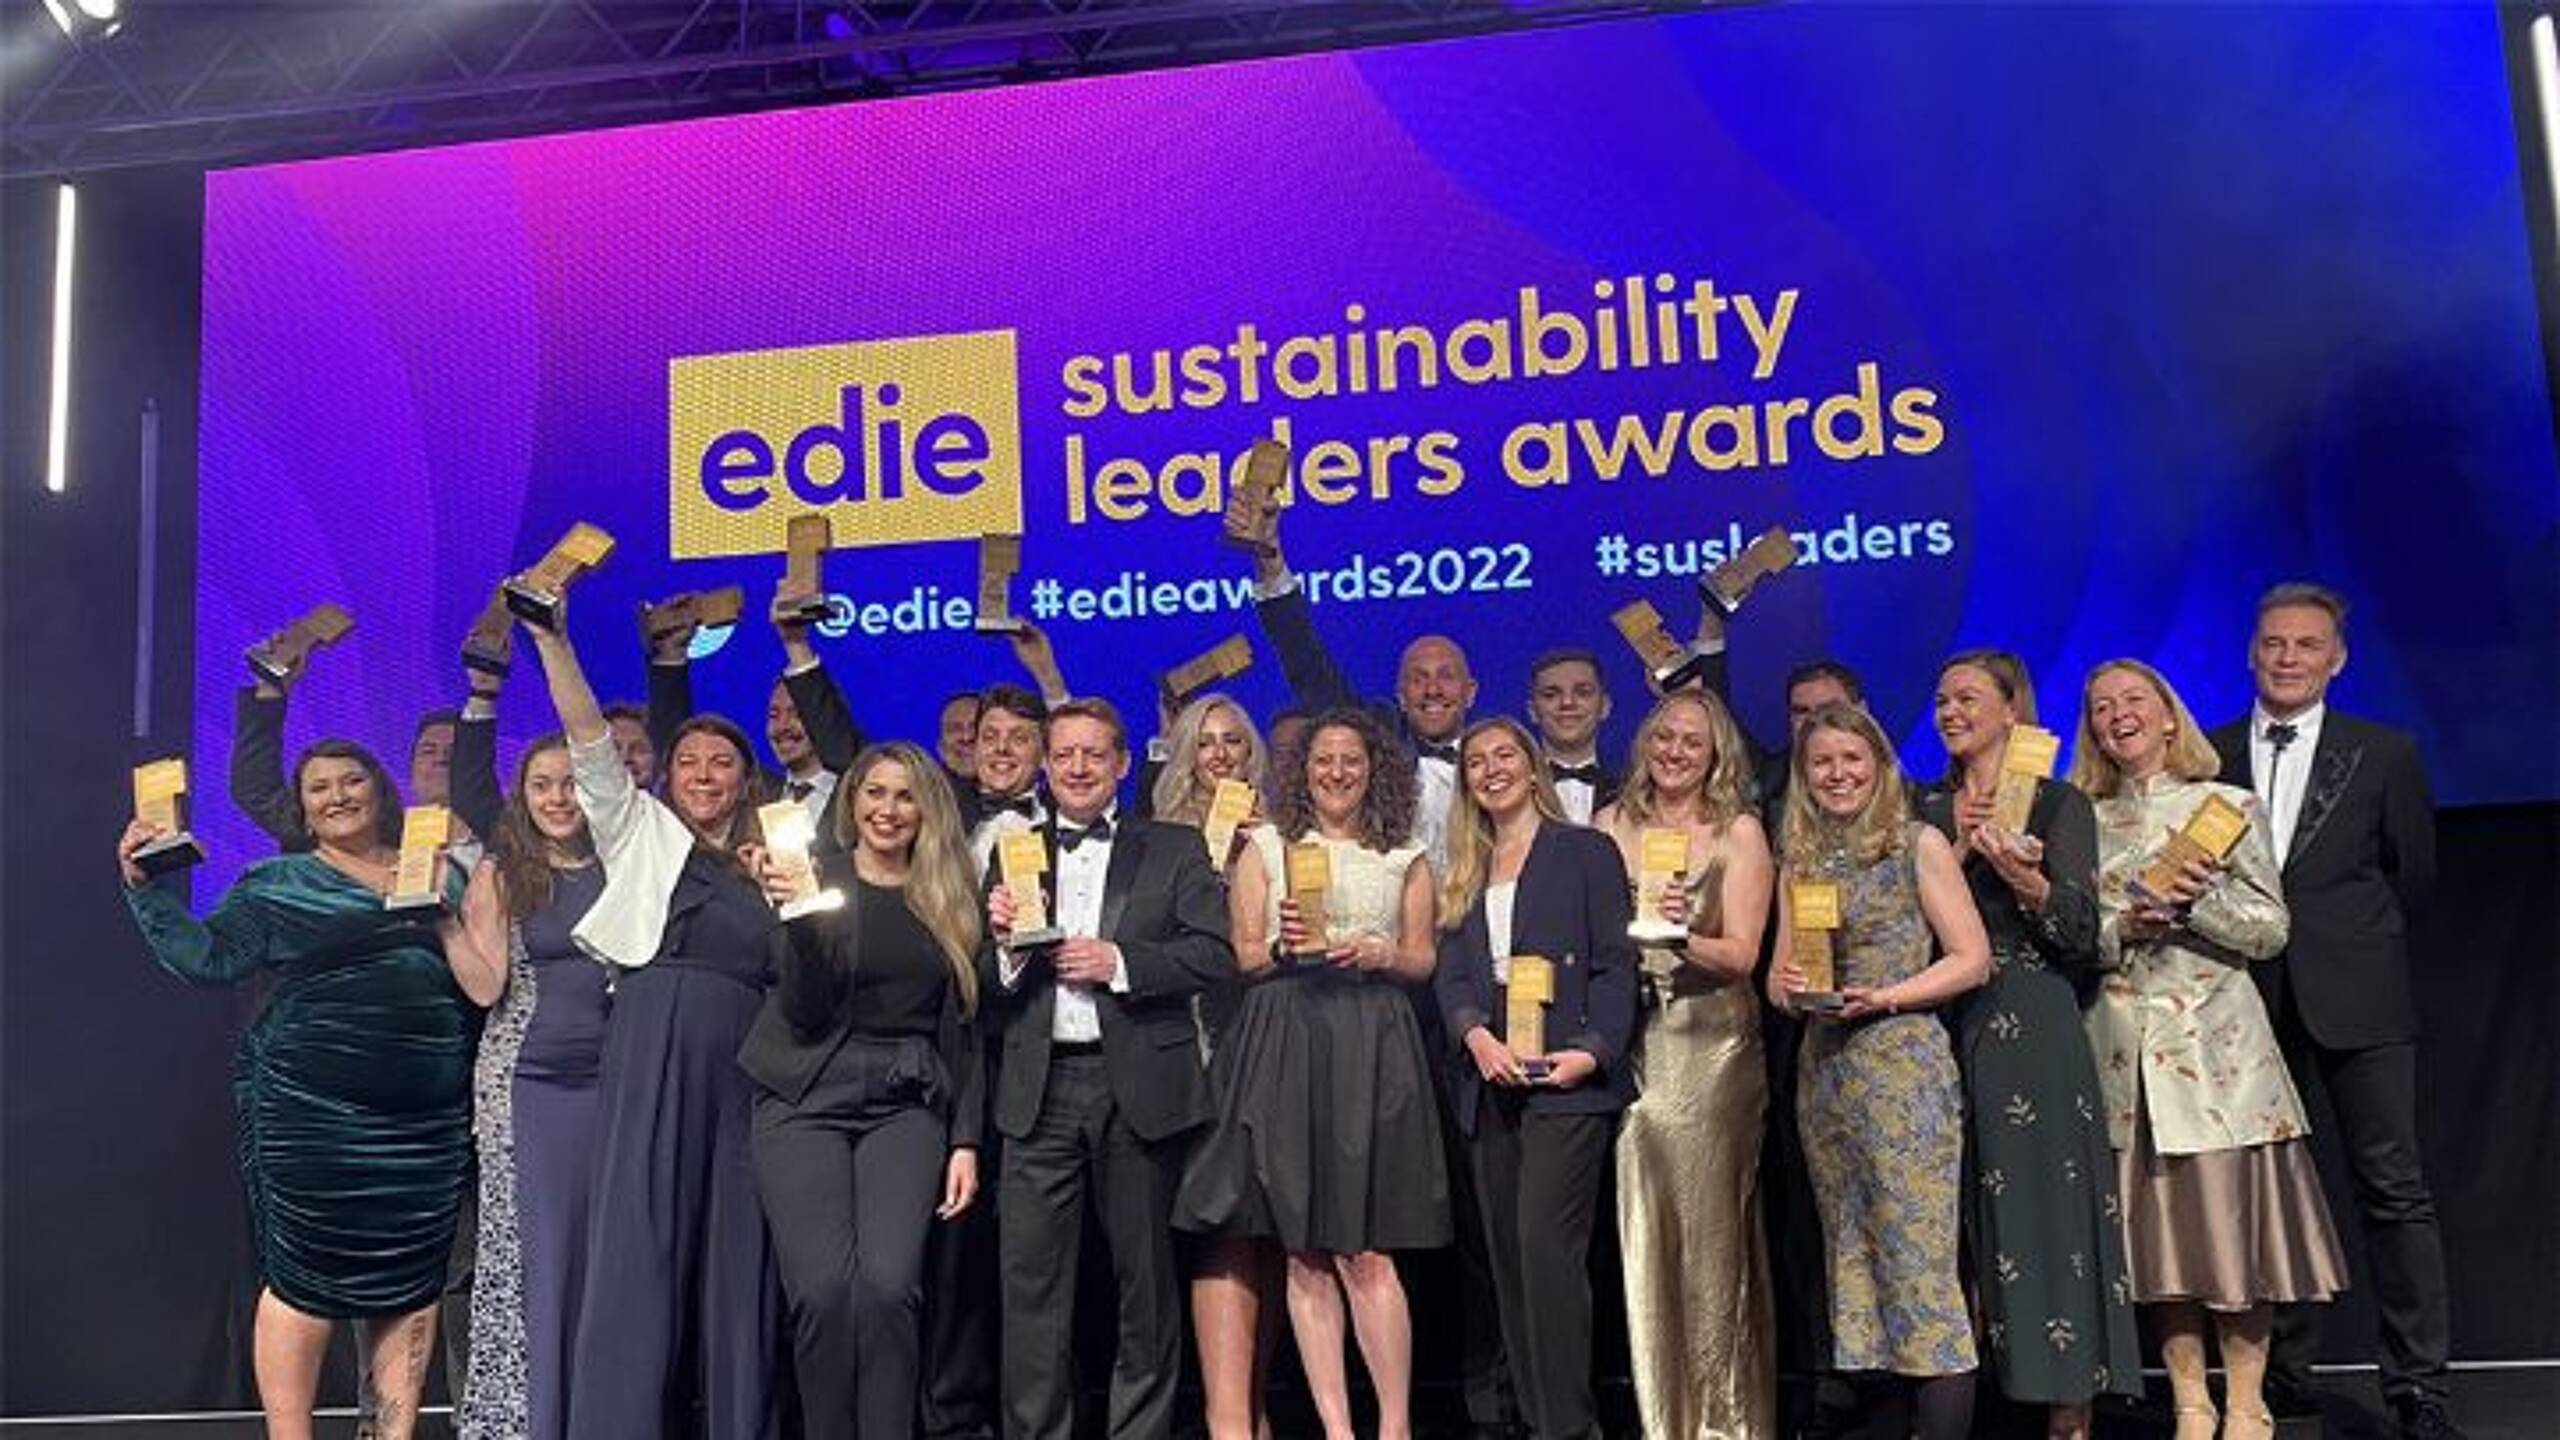 Sustainability Leaders Awards 2022 Winners revealed at dazzling